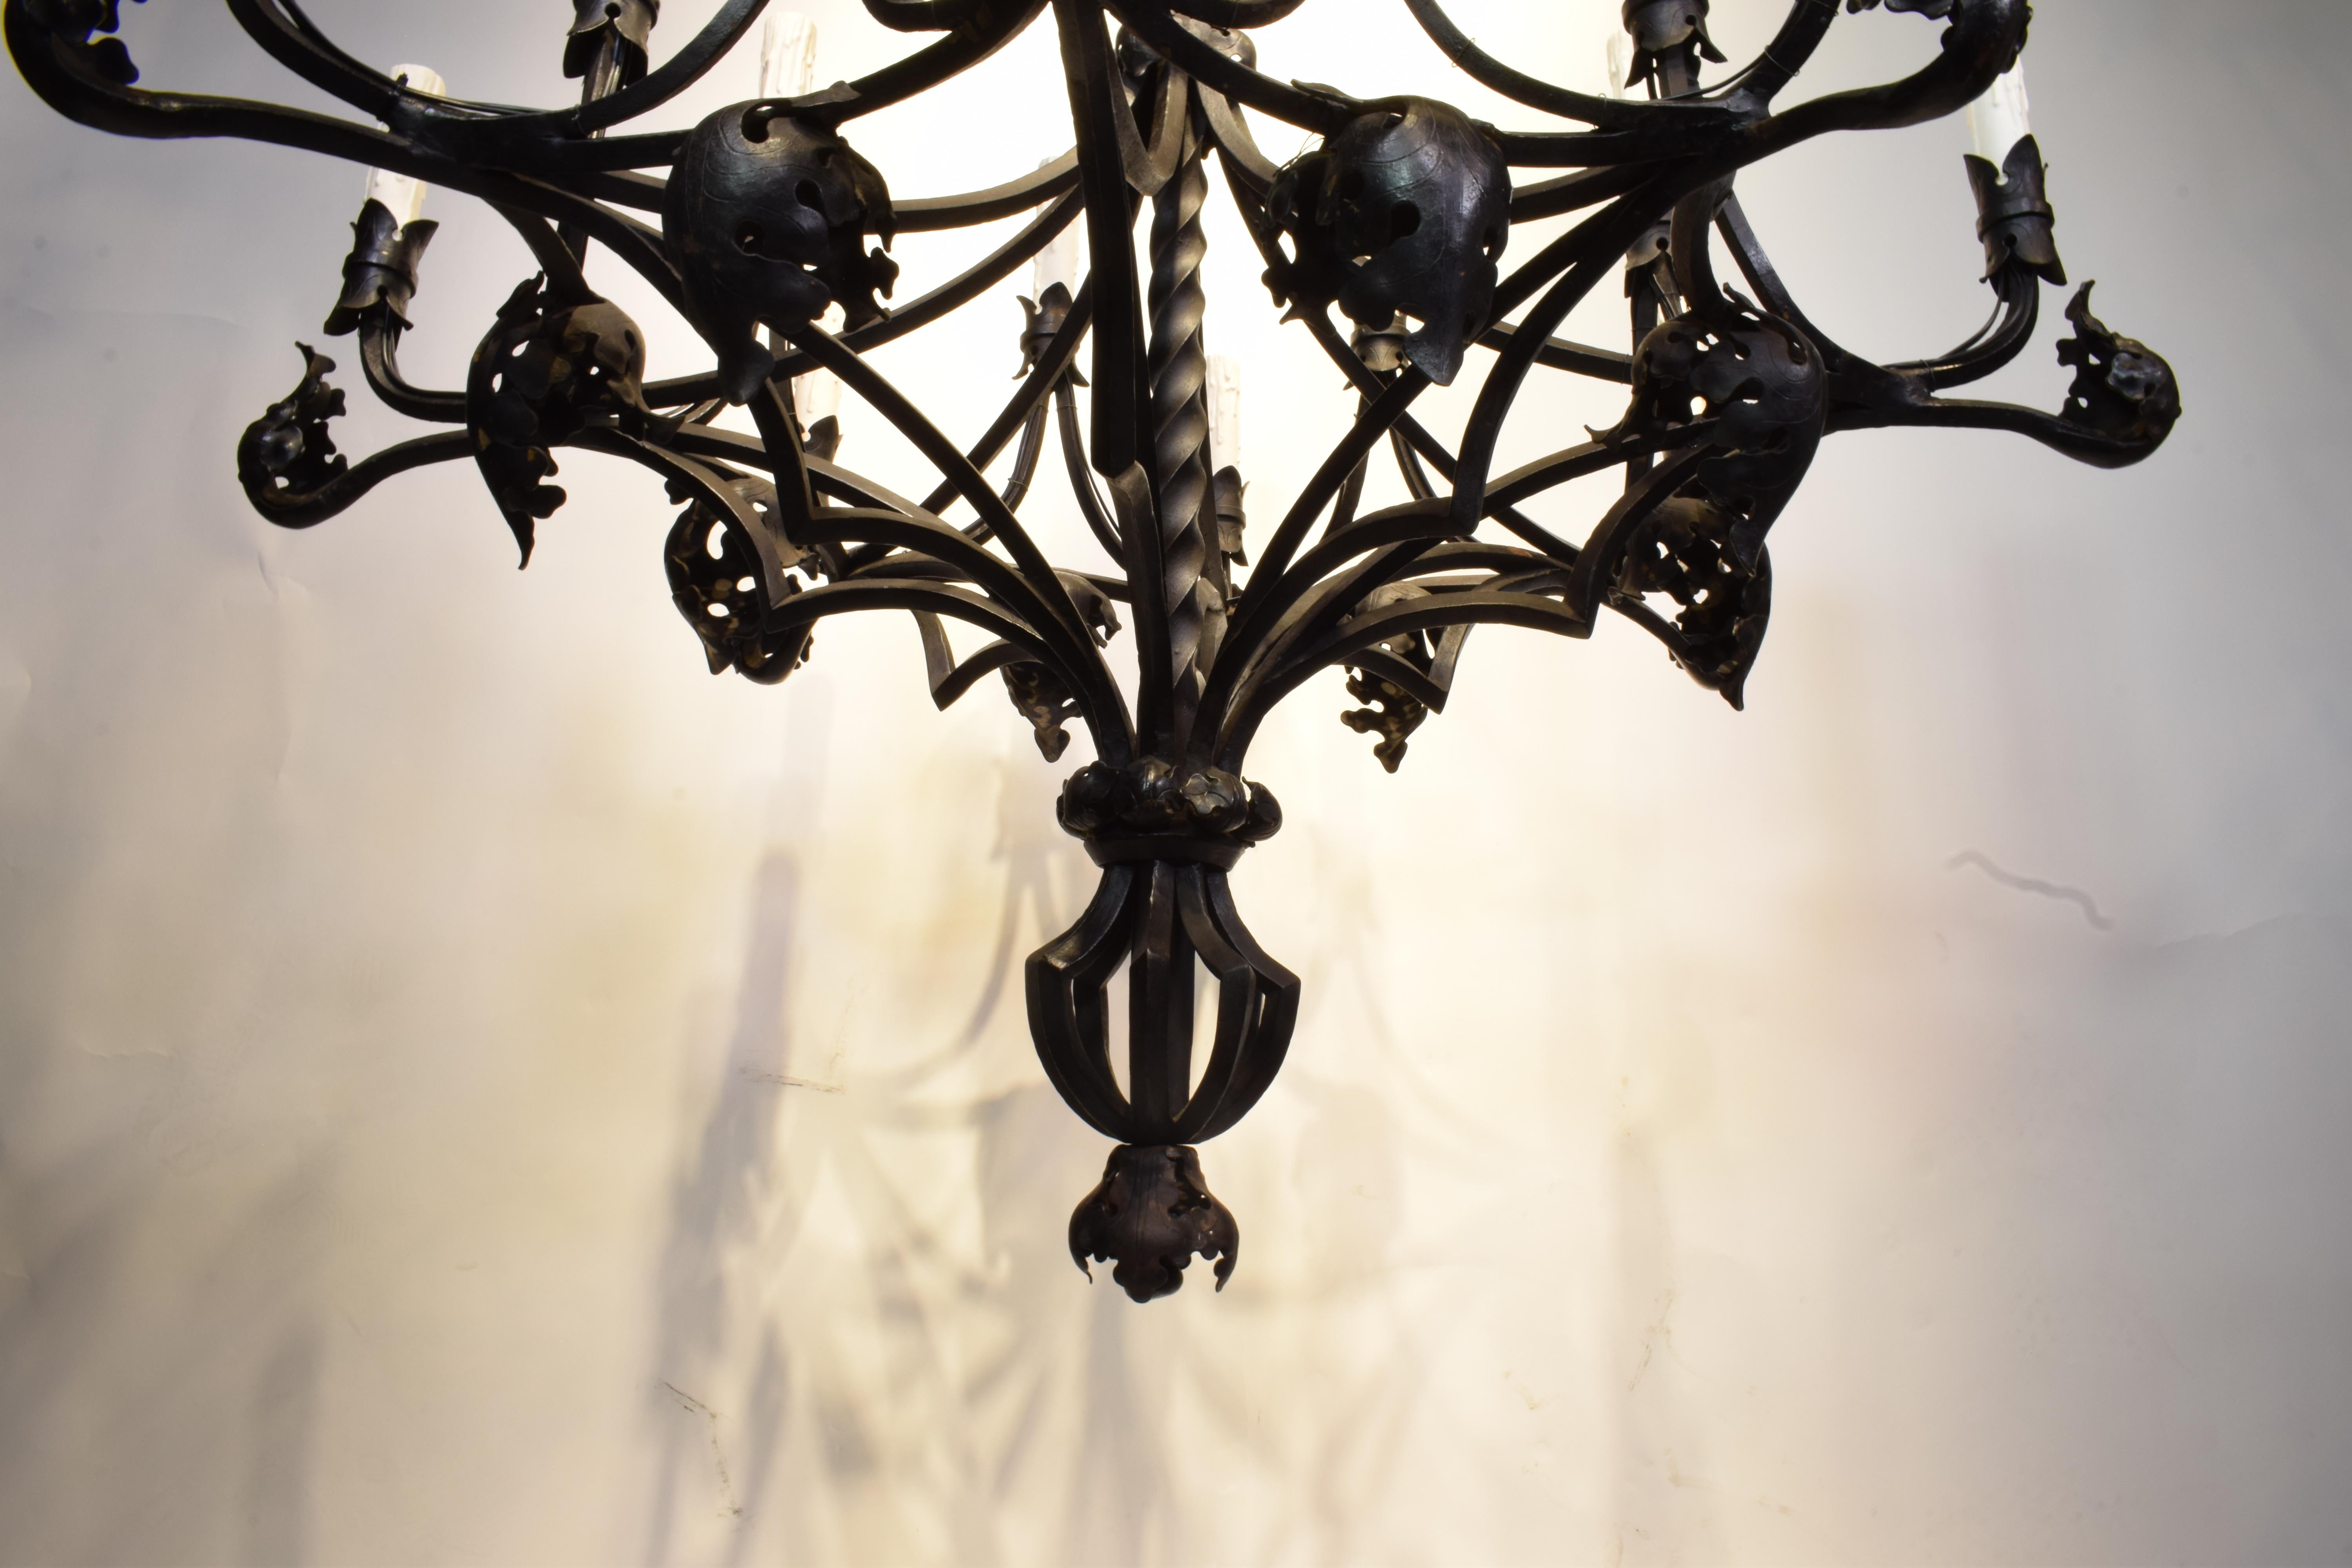 A Very Fine Hand Hammered Iron Chandelier in the Gothic style. Extraordinary iron work. 16 lights. France, circa 1890. 
Dimensions: Height 51